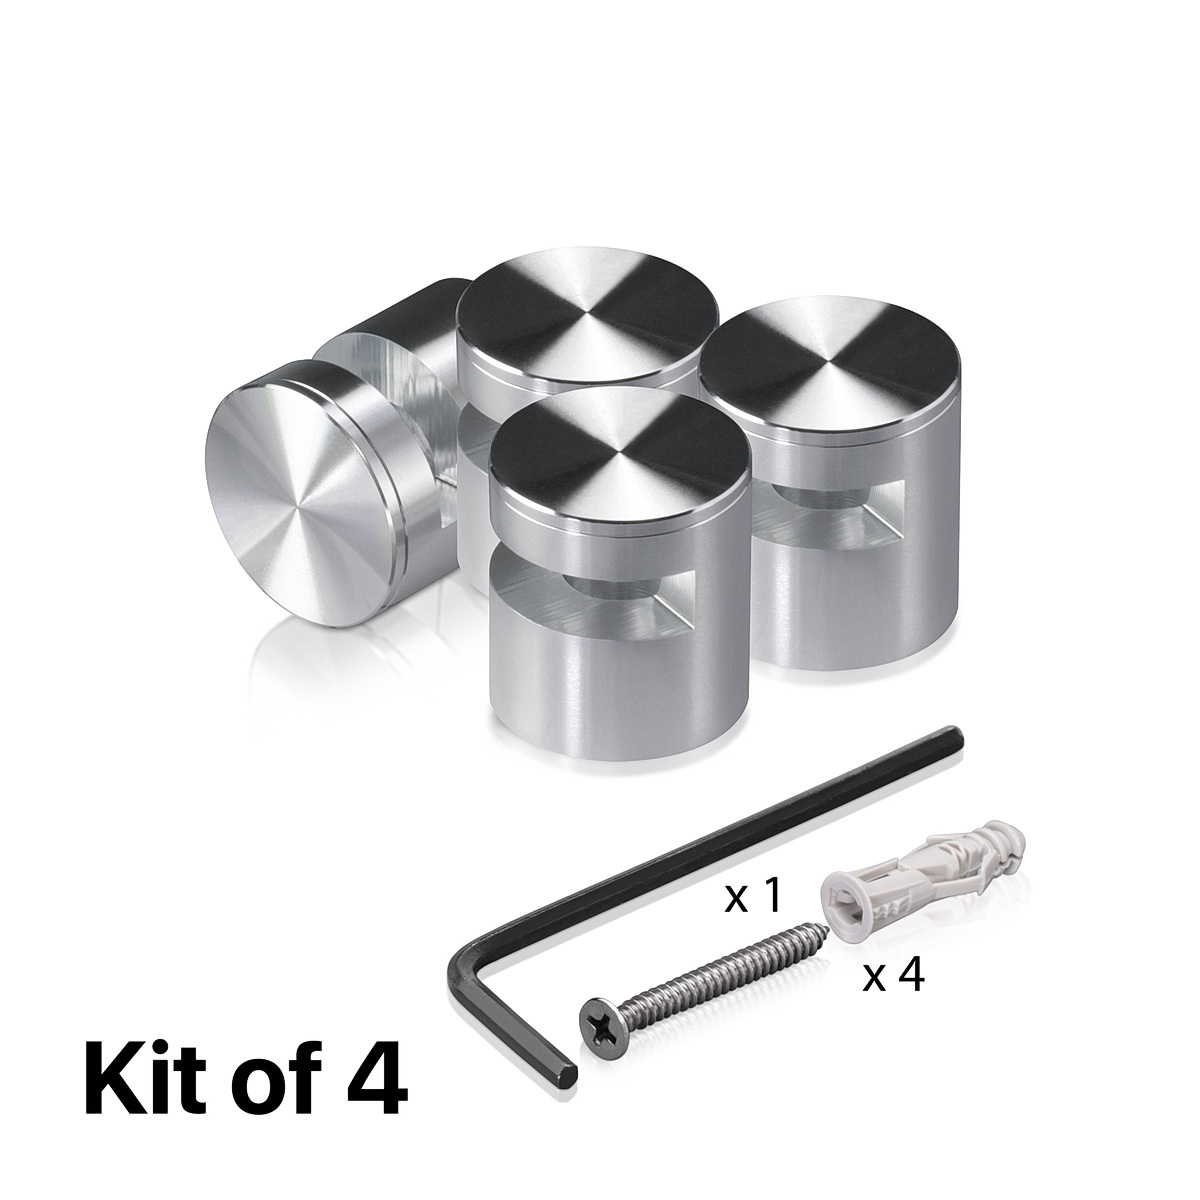 (Set of 4) 1'' Diameter X 9/16'' Barrel Length, Aluminum Clear Anodized Finish. Easy Fasten Edge Grip Standoff with (4) 2216Z Screws and (4) LANC1 Anchors for concrete or drywall (For Inside Use Only)